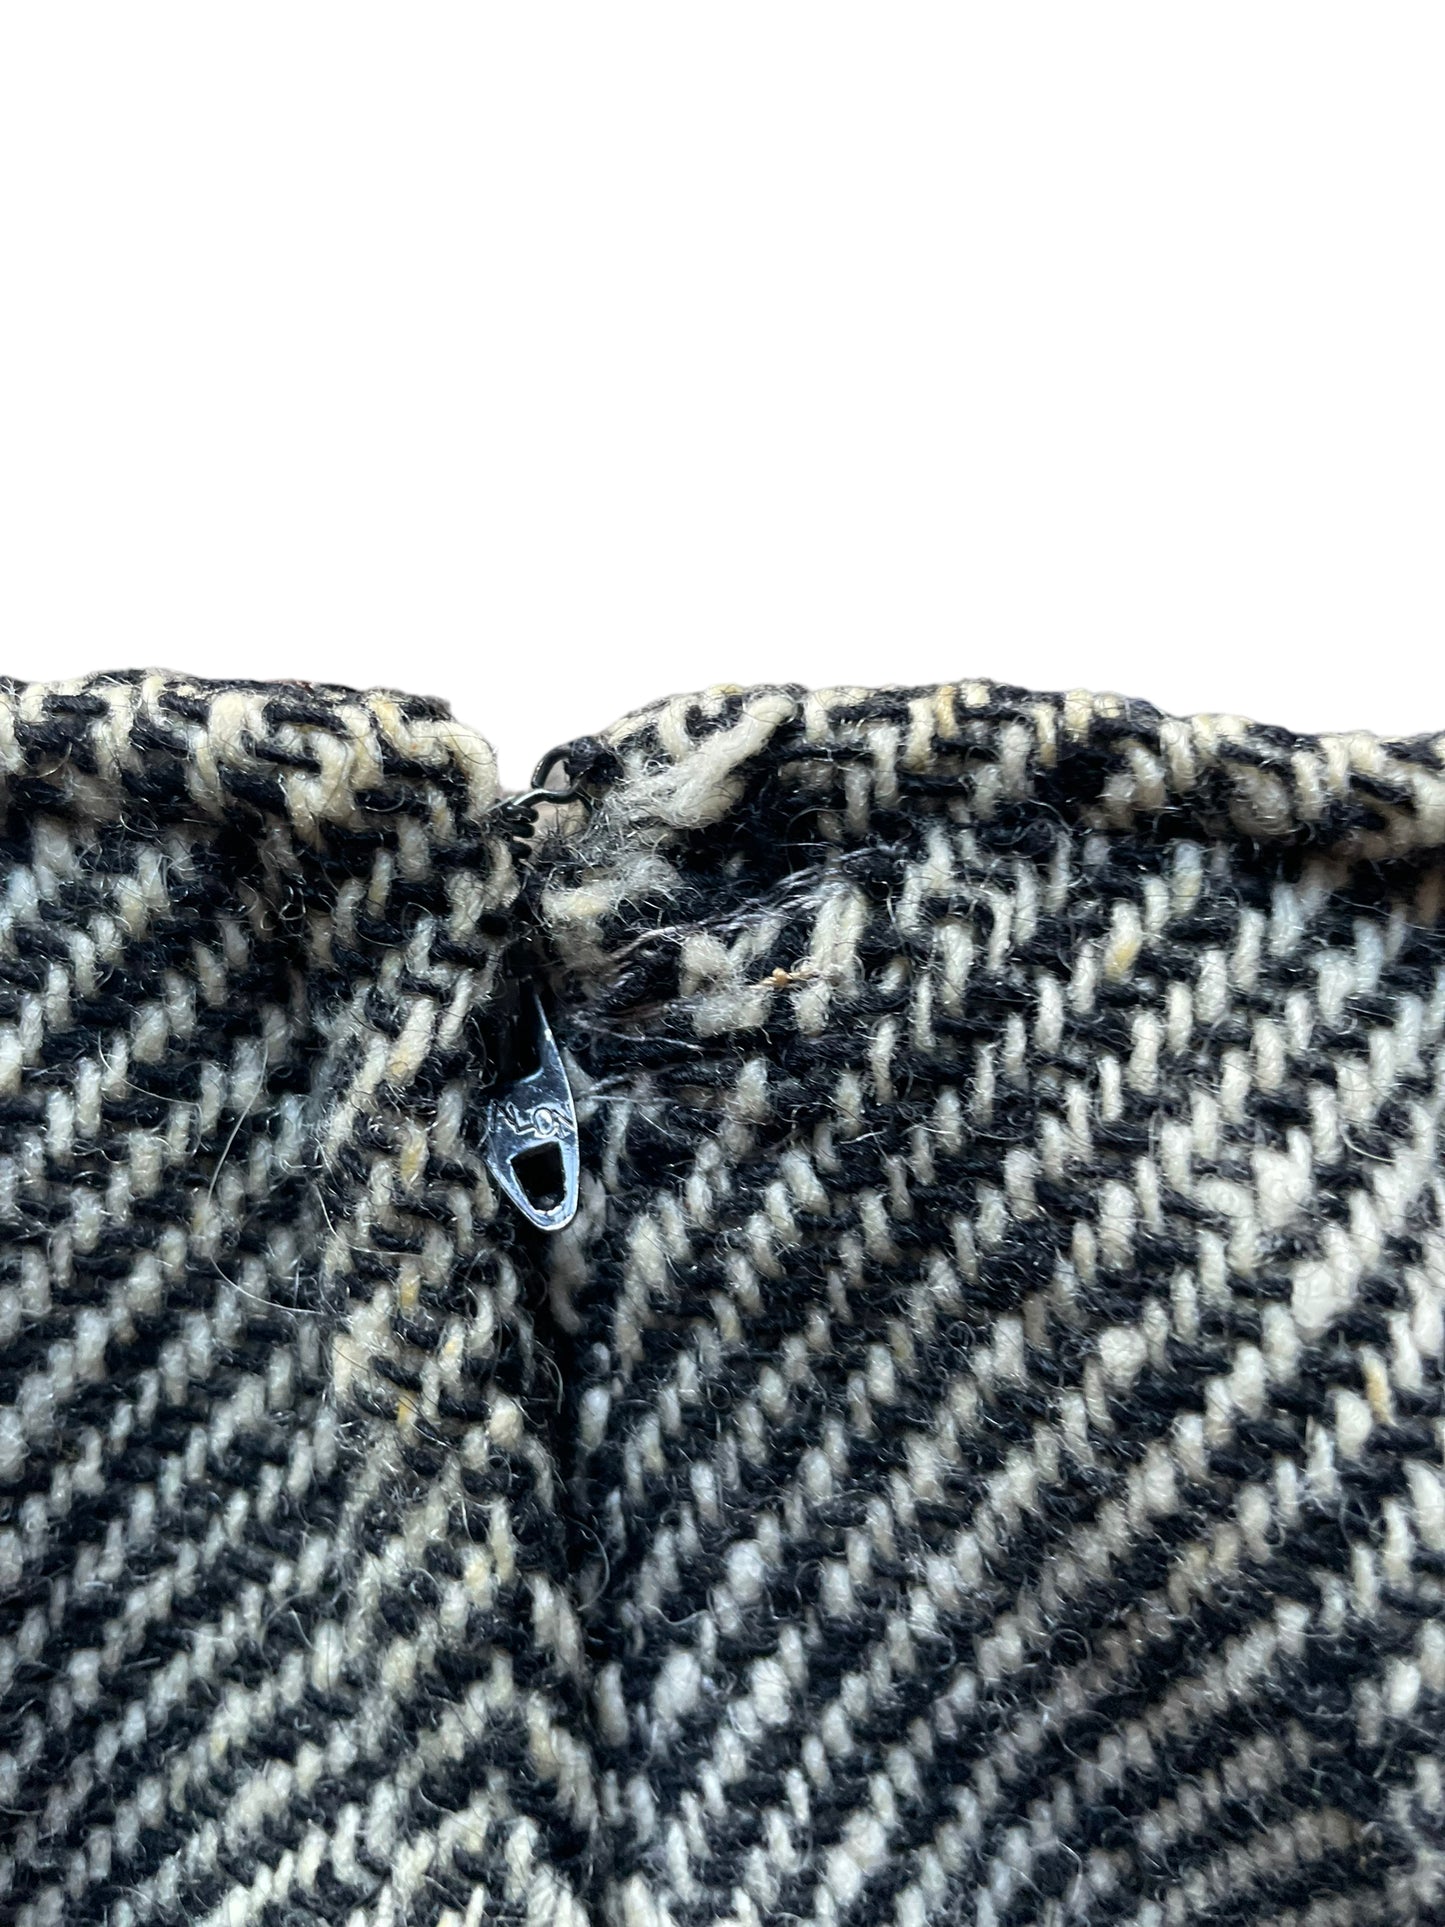 Mended area near zipper view of Vintage 1950s Suggi of California Wool Cigarette Pants